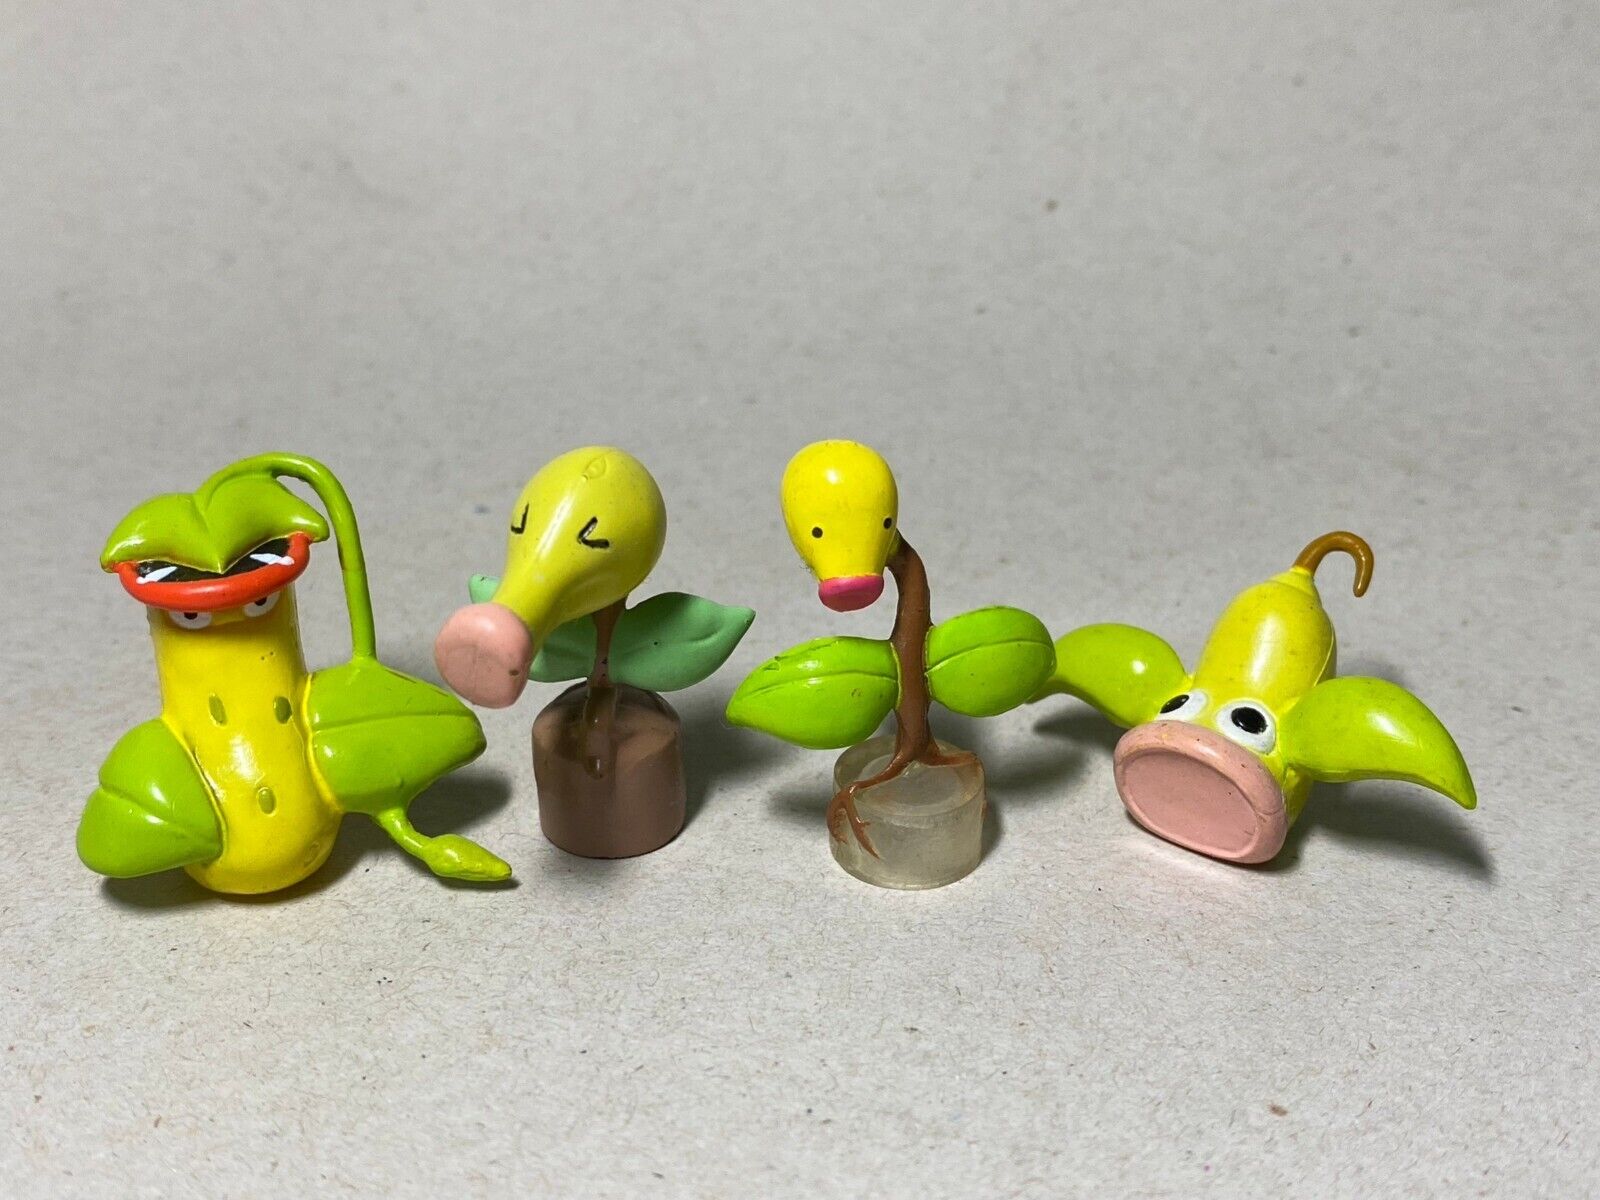 Bellsprout, Weepinbell, Victreebel Pokemon Monster Bandai Collection Figure Toy.